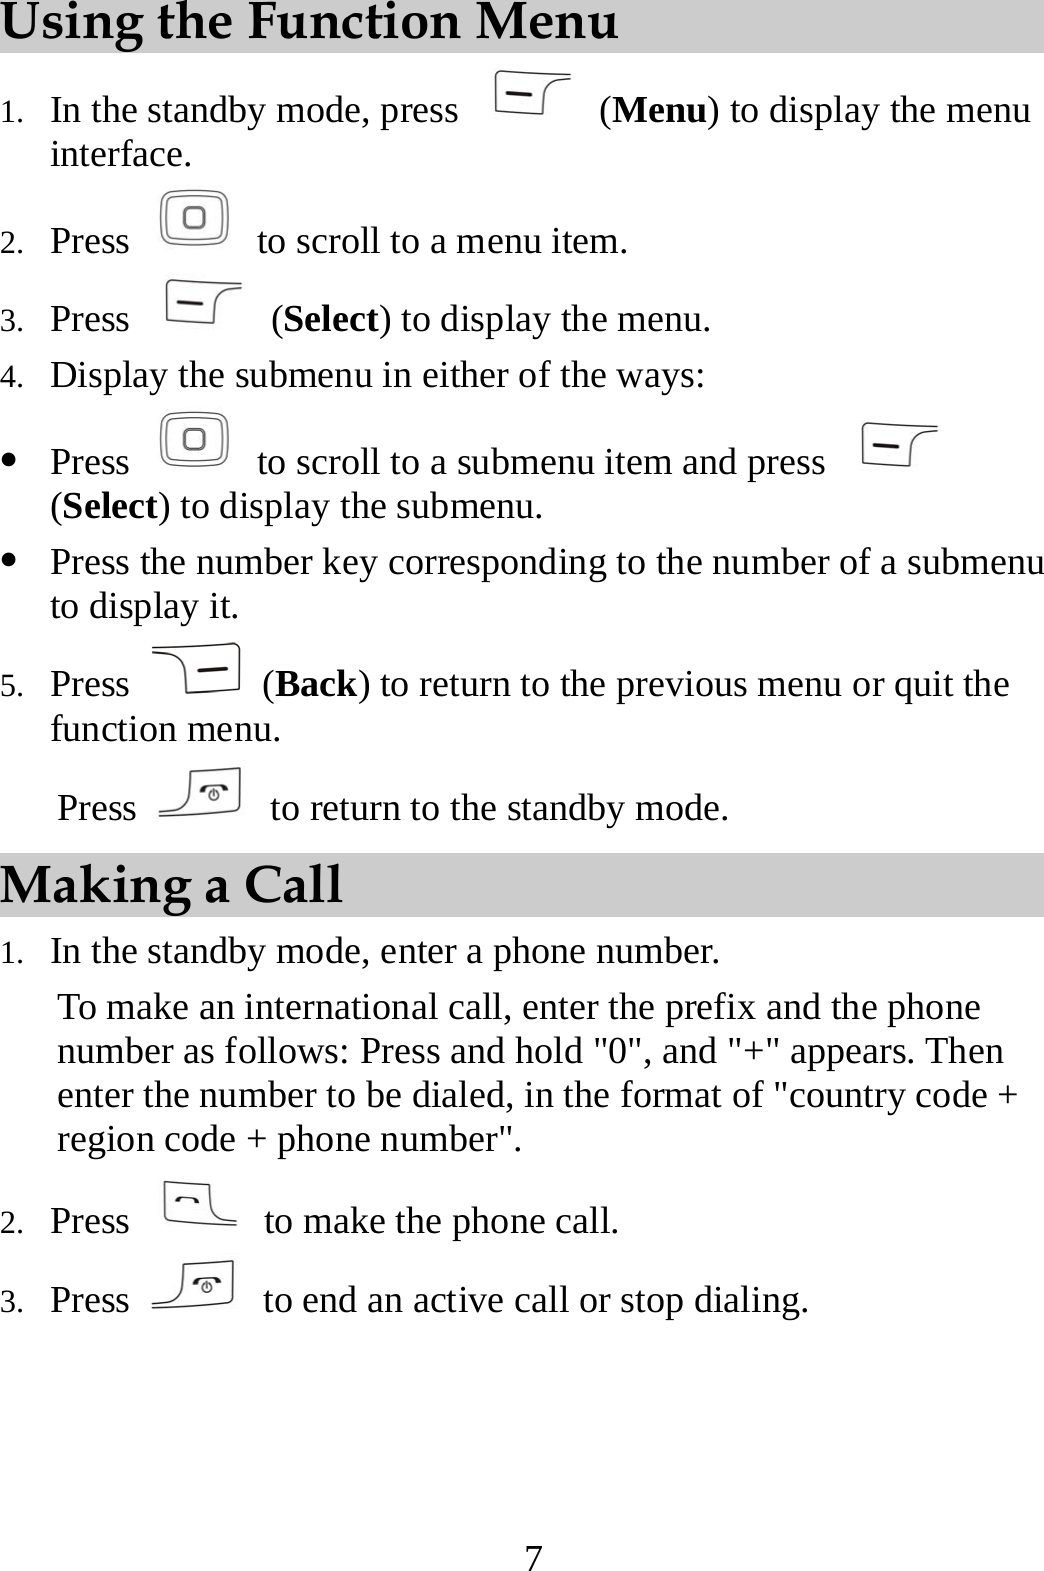 7 Using the Function Menu 1. In the standby mode, press   (Menu) to display the menu interface. 2. Press    to scroll to a menu item. 3. Press   (Select) to display the menu. 4. Display the submenu in either of the ways: z Press    to scroll to a submenu item and press   (Select) to display the submenu. z Press the number key corresponding to the number of a submenu to display it. 5. Press   (Back) to return to the previous menu or quit the function menu.  Press    to return to the standby mode. Making a Call 1. In the standby mode, enter a phone number. To make an international call, enter the prefix and the phone number as follows: Press and hold &quot;0&quot;, and &quot;+&quot; appears. Then enter the number to be dialed, in the format of &quot;country code + region code + phone number&quot;. 2. Press    to make the phone call. 3. Press    to end an active call or stop dialing. 